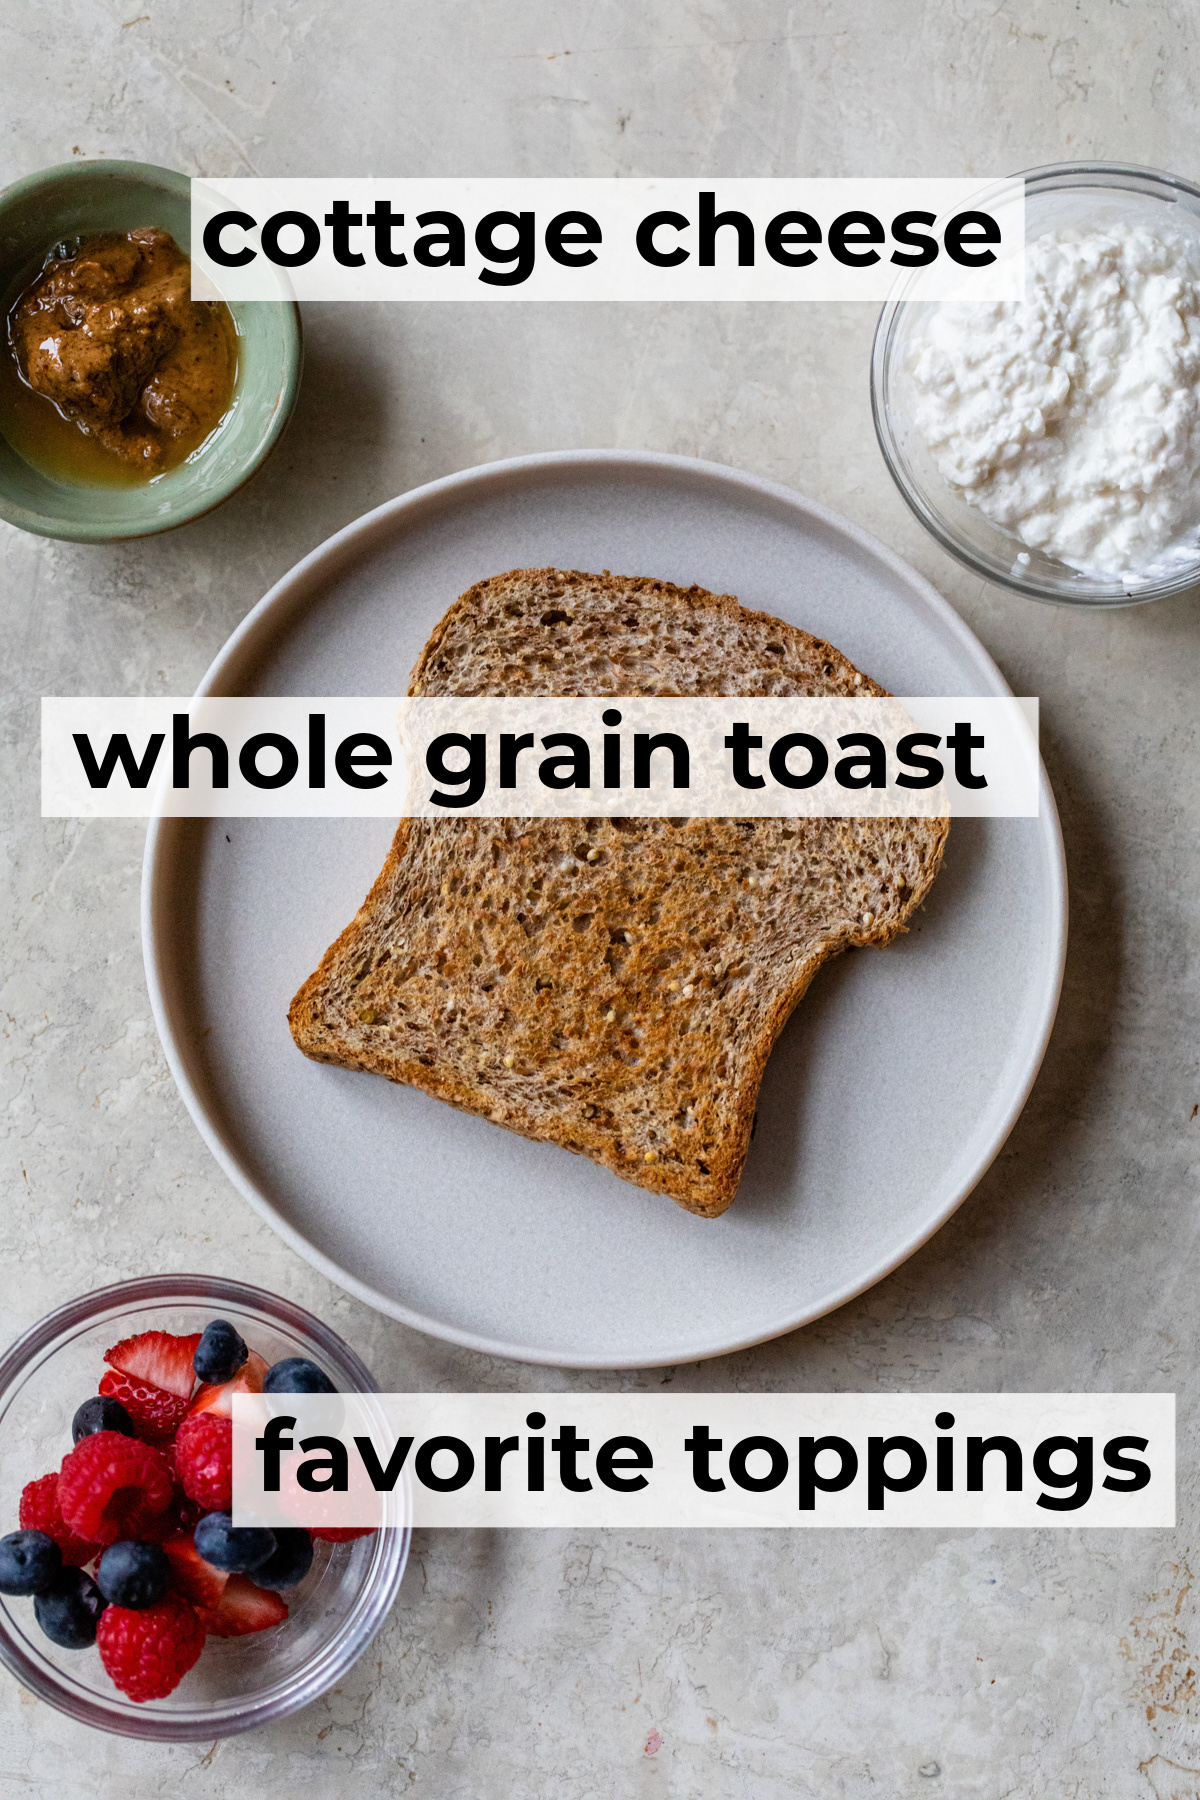 ingredients needed to make cottage cheese toast (toast, cottage cheese & toppings)